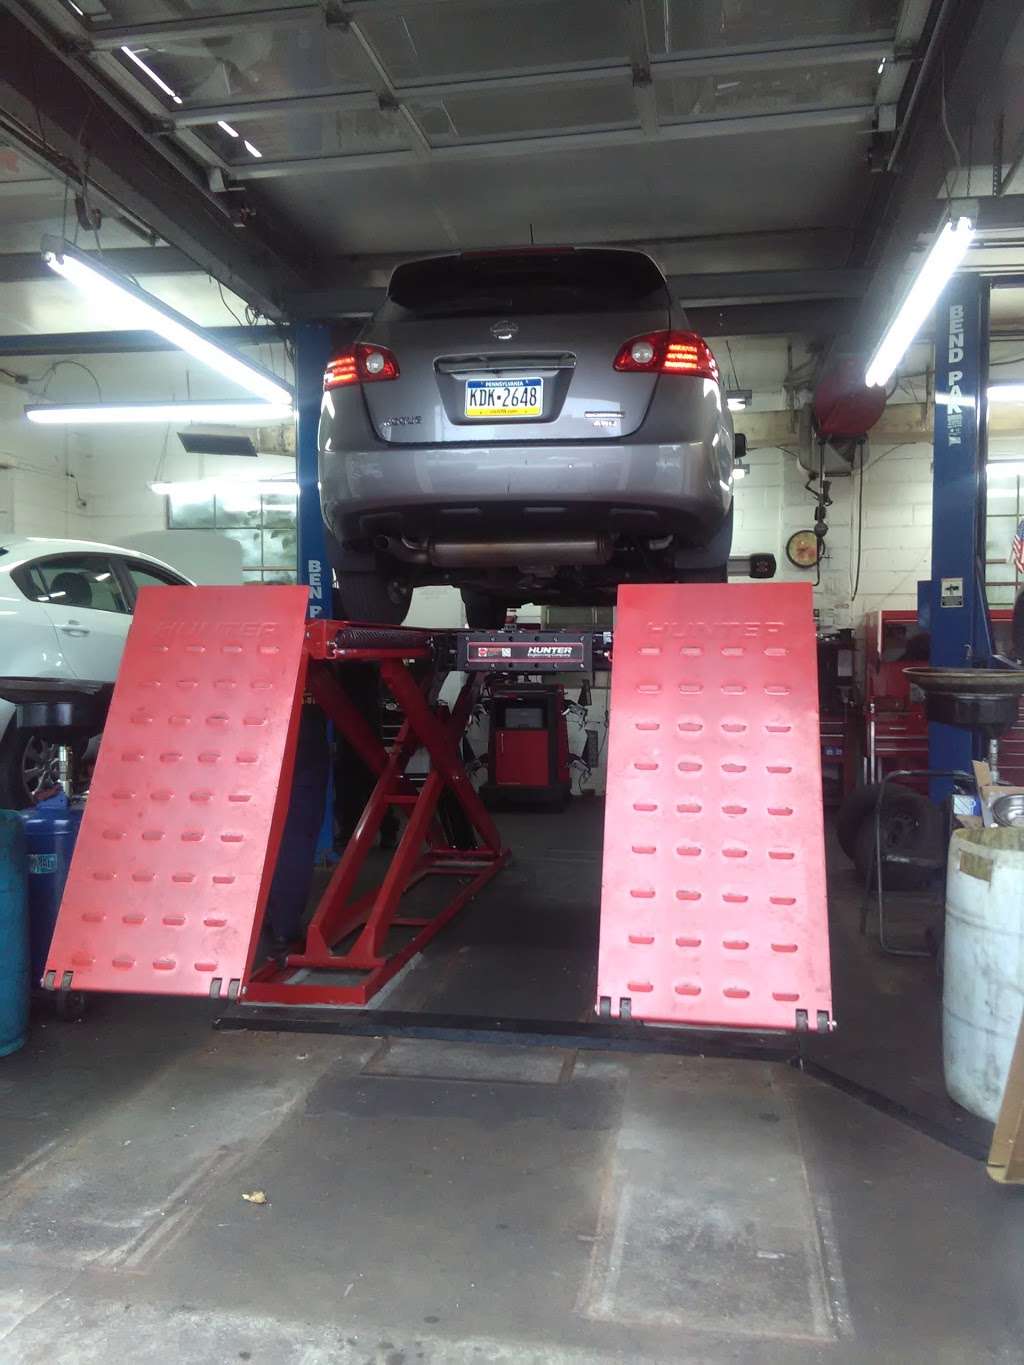 Daves Automotive Center | 7000 Torresdale Ave, Philadelphia, PA 19135 | Phone: (215) 624-8151